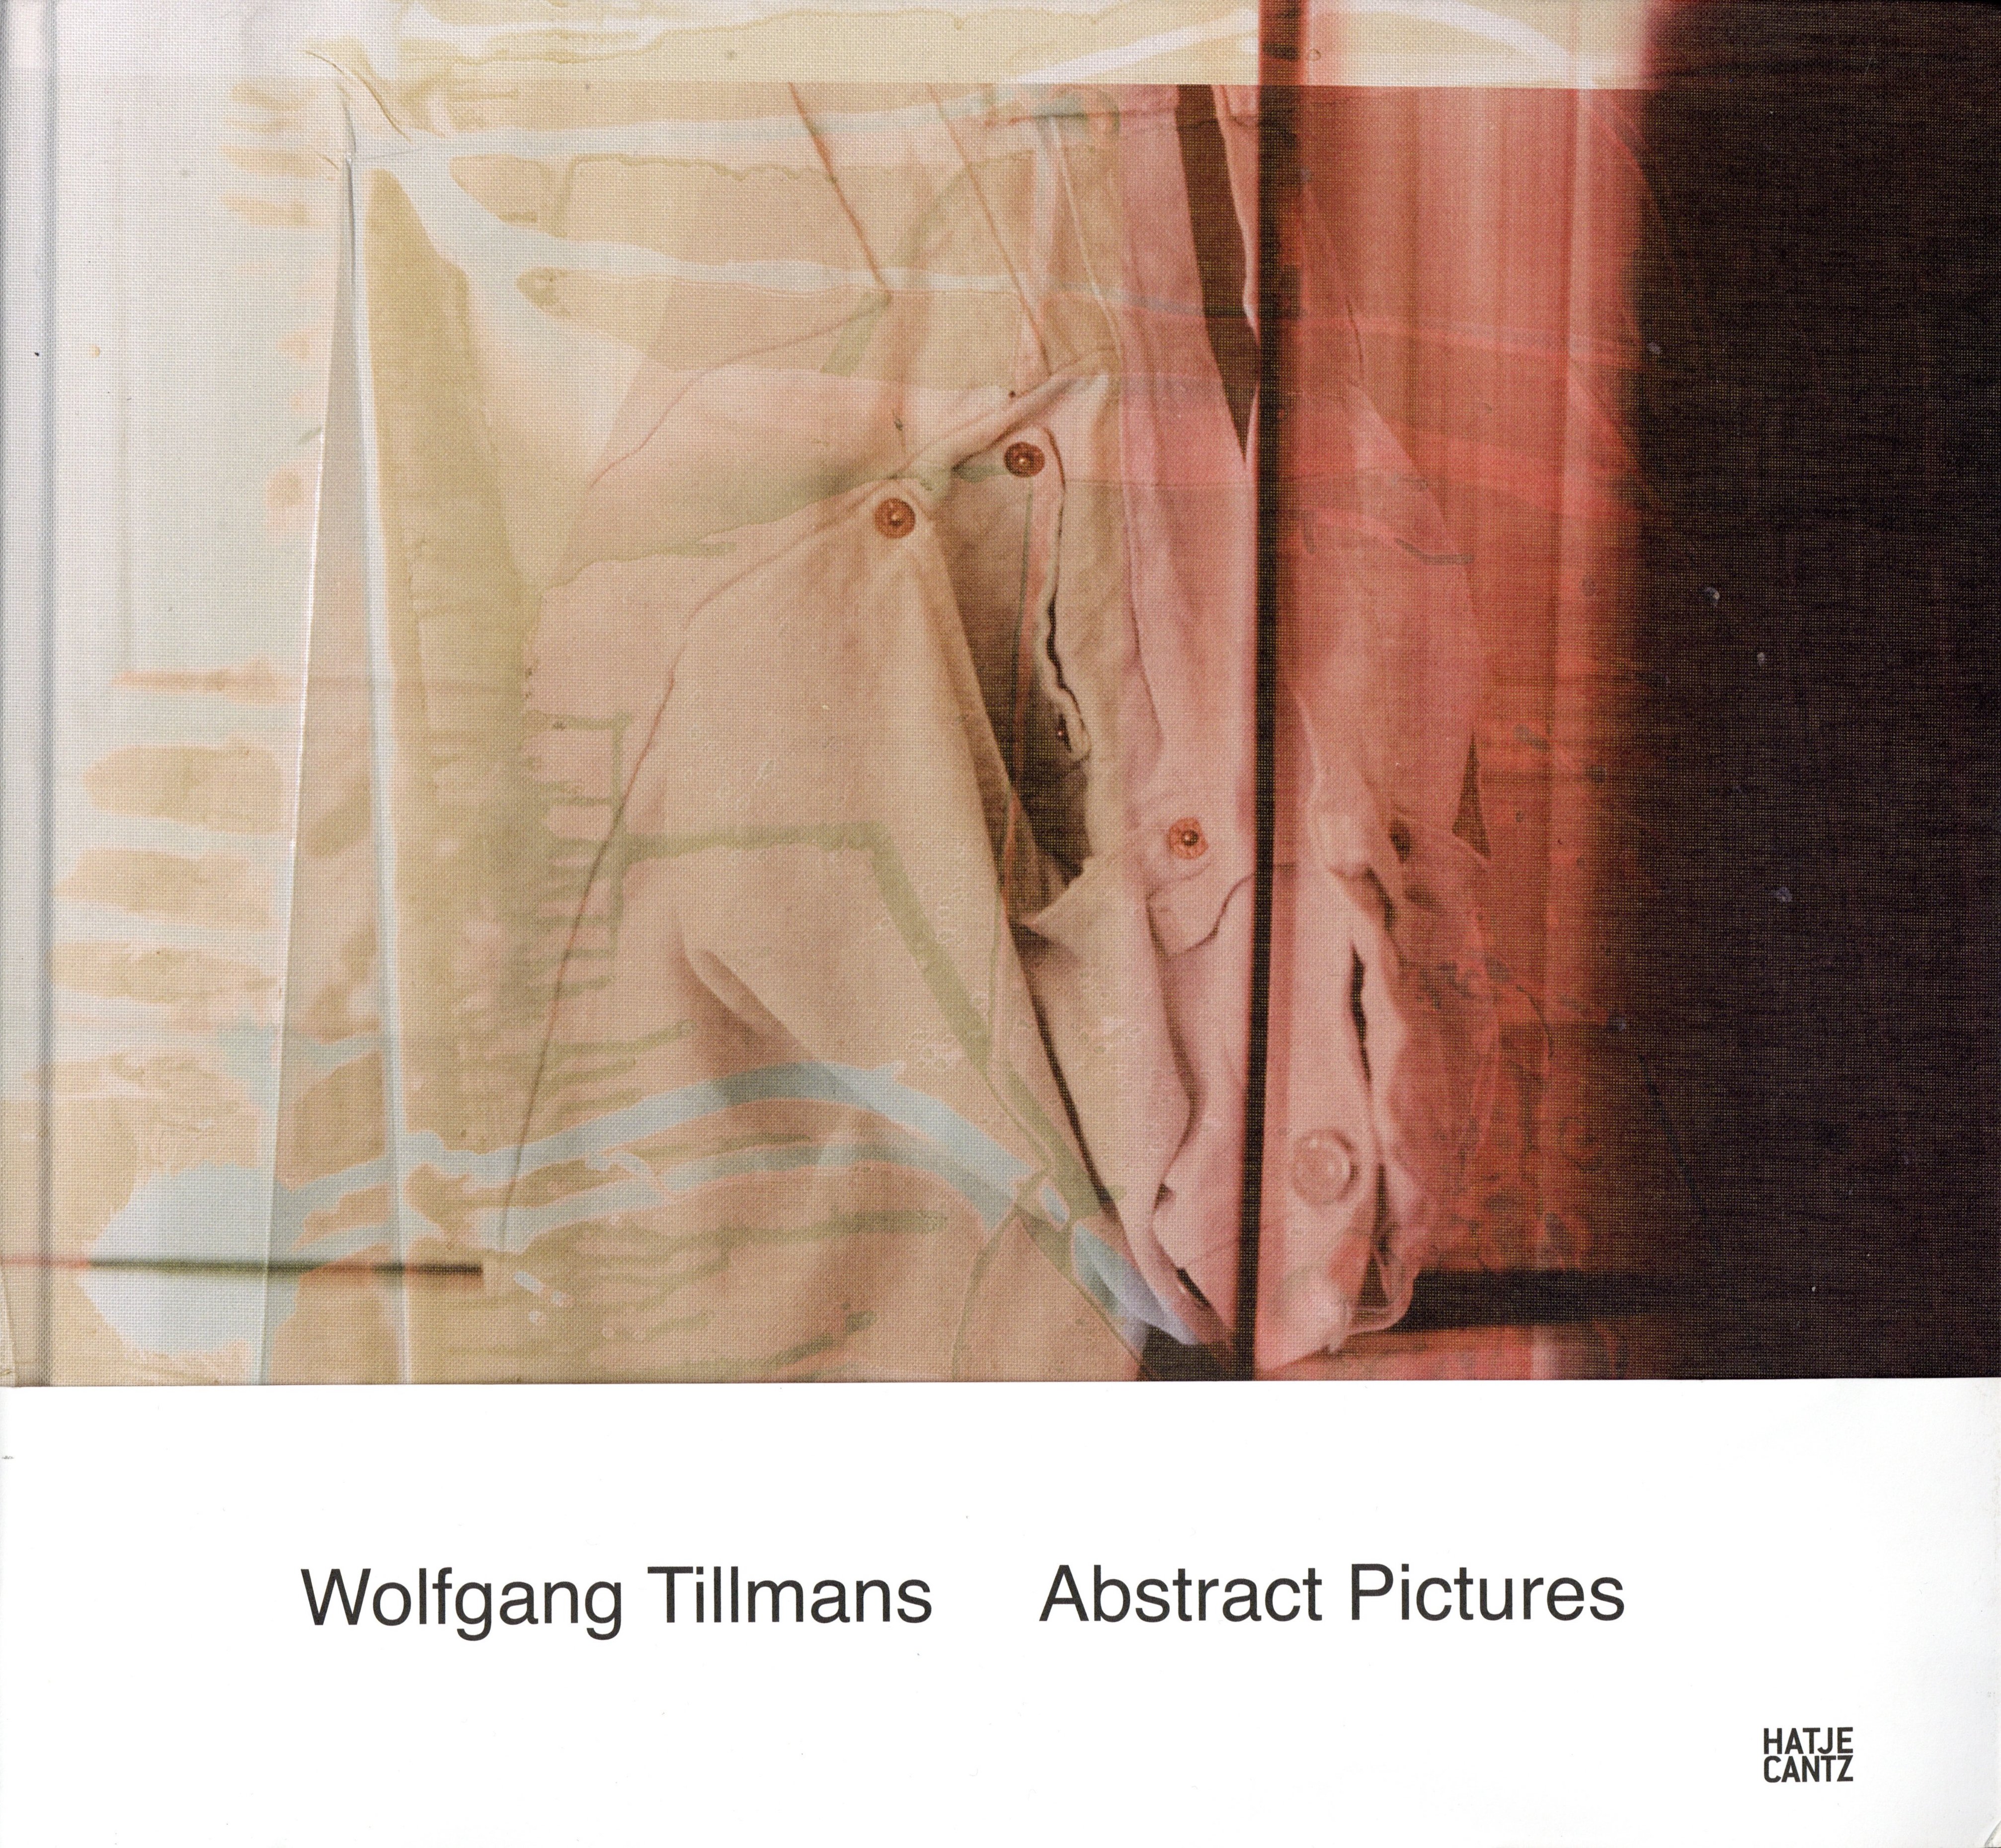 「Wolfgang Tillmans　Abstract Pictures / Photo: Wolfgang Tillmans　Edit, Design: Wolfgang Tillmans, Karl Kolbitz　Essays: Dominic Eichler」メイン画像